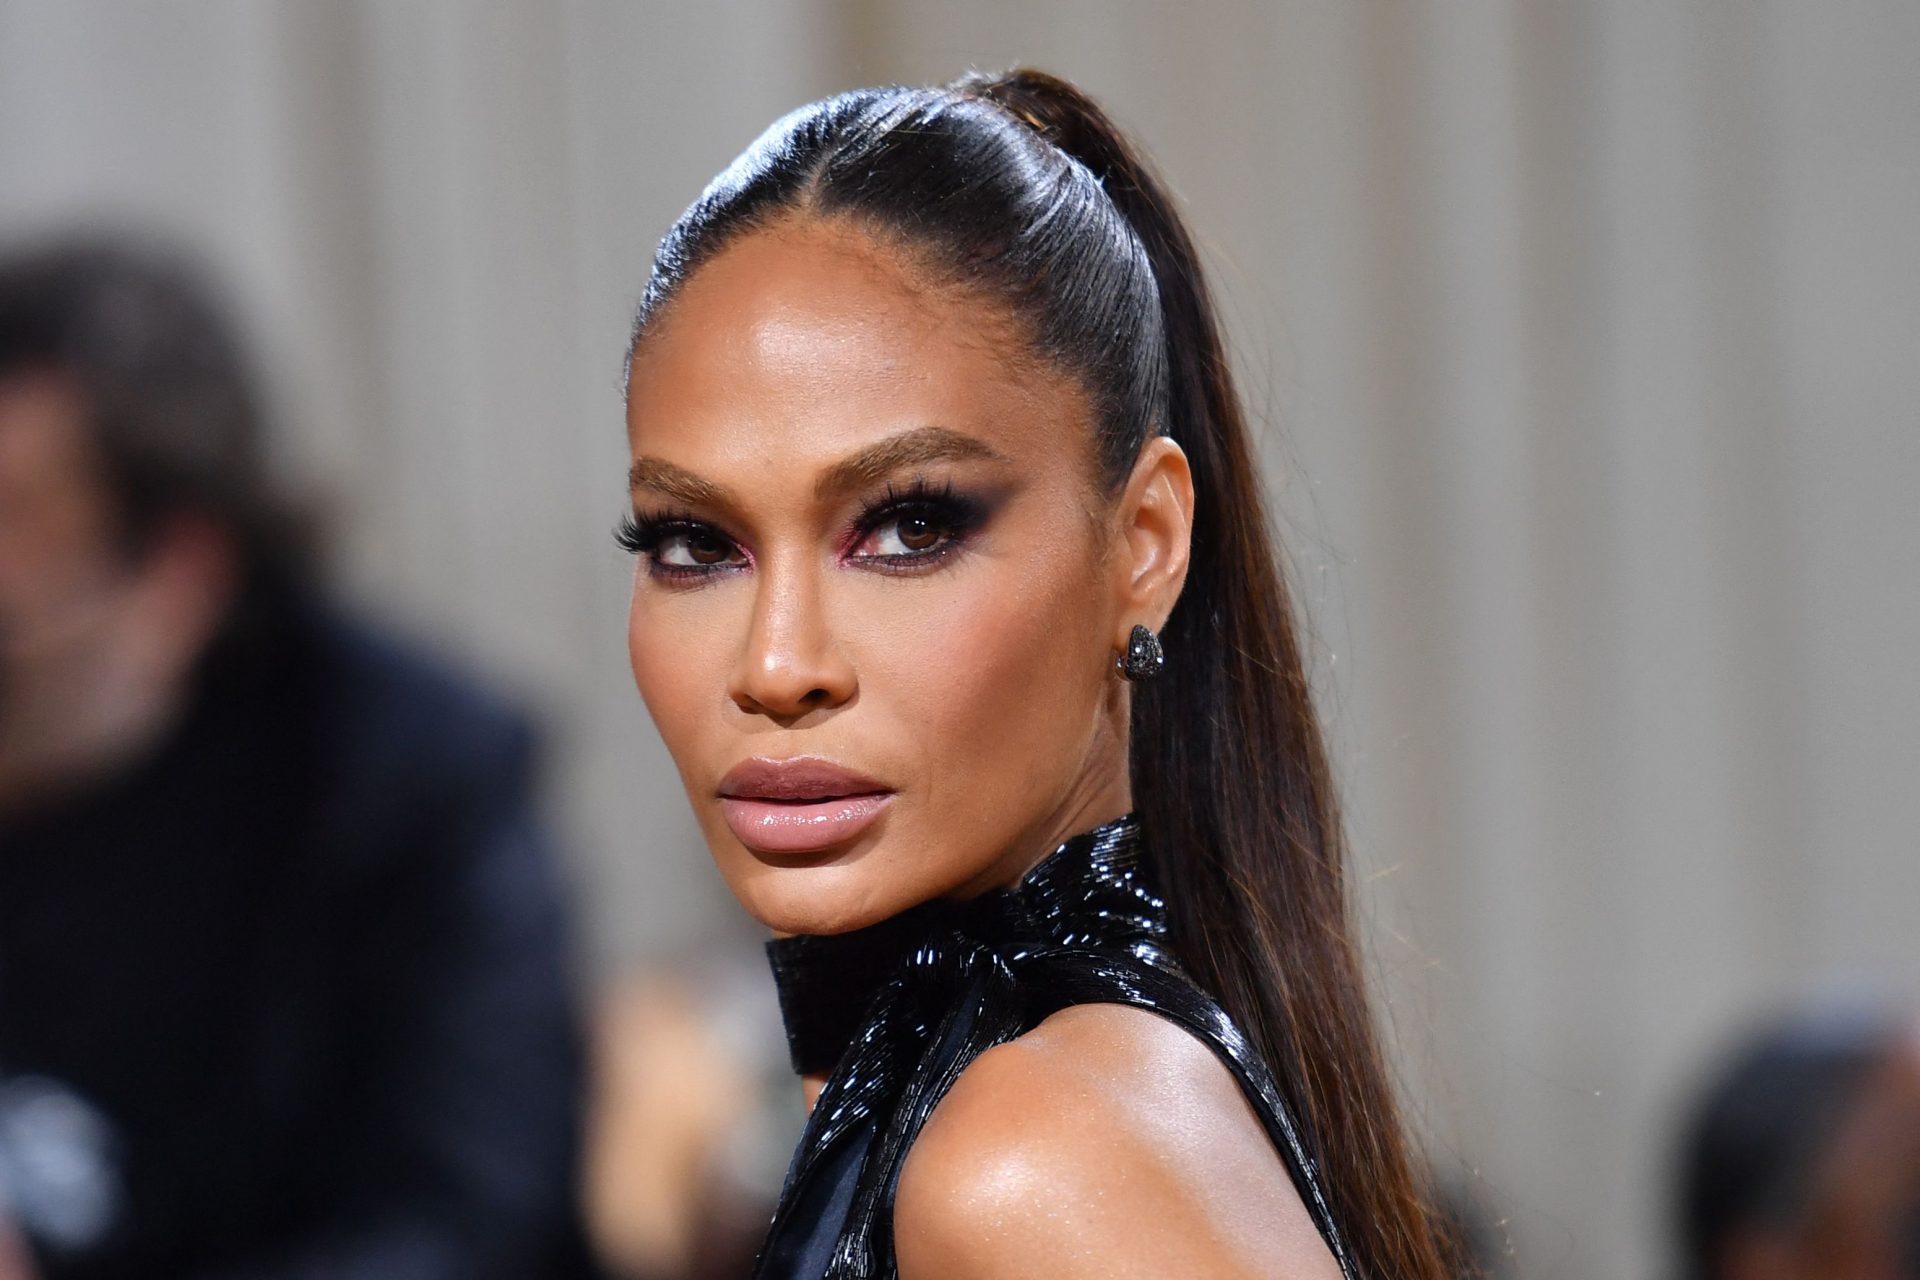 <p>Joan Smalls, born in 1988 of Puerto Rican descent, saw the world's most important runways open to her after joining Elite Model Management.</p> <p>Net worth: $26 million</p>